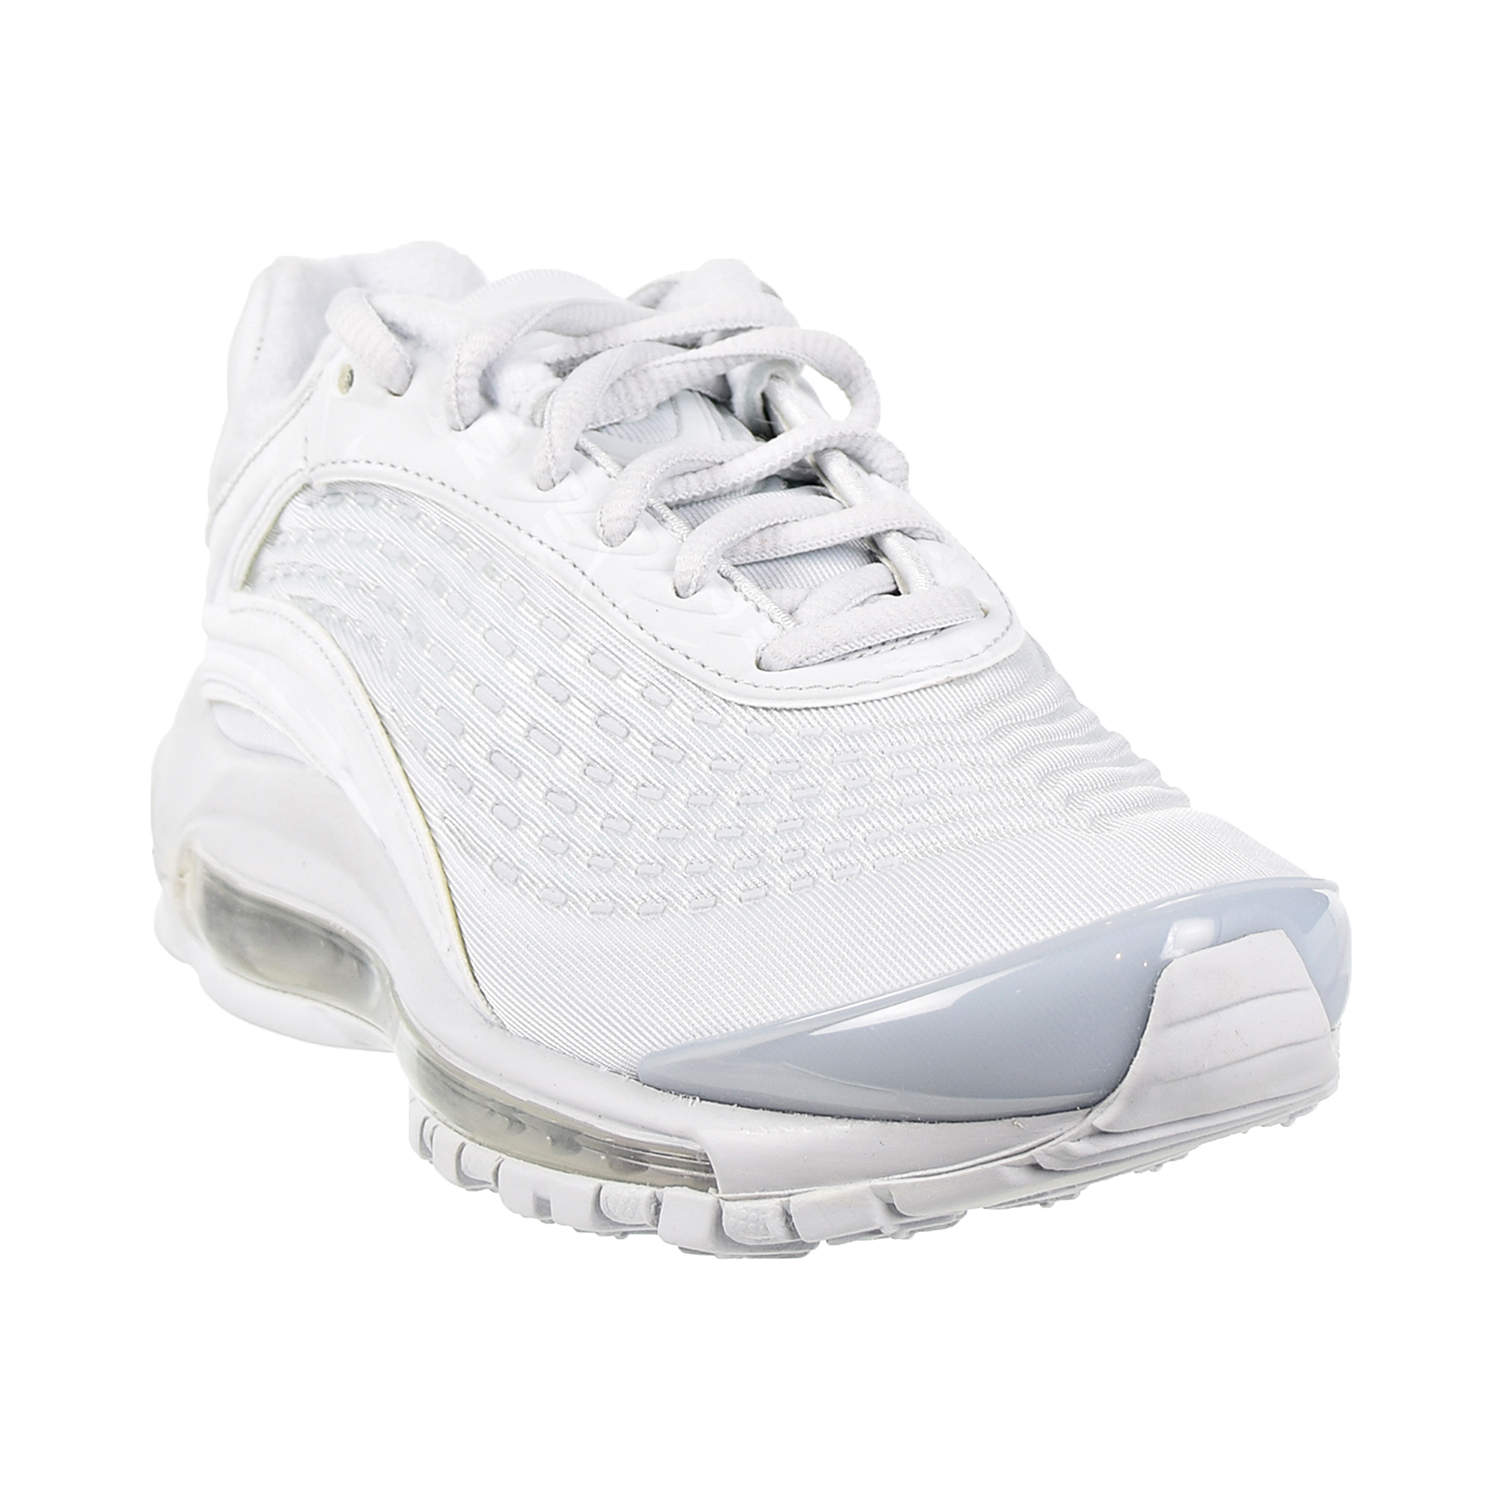 Nike Air Max Deluxe SE Women's Shoes Pure Platinum at8692-002 - image 2 of 6